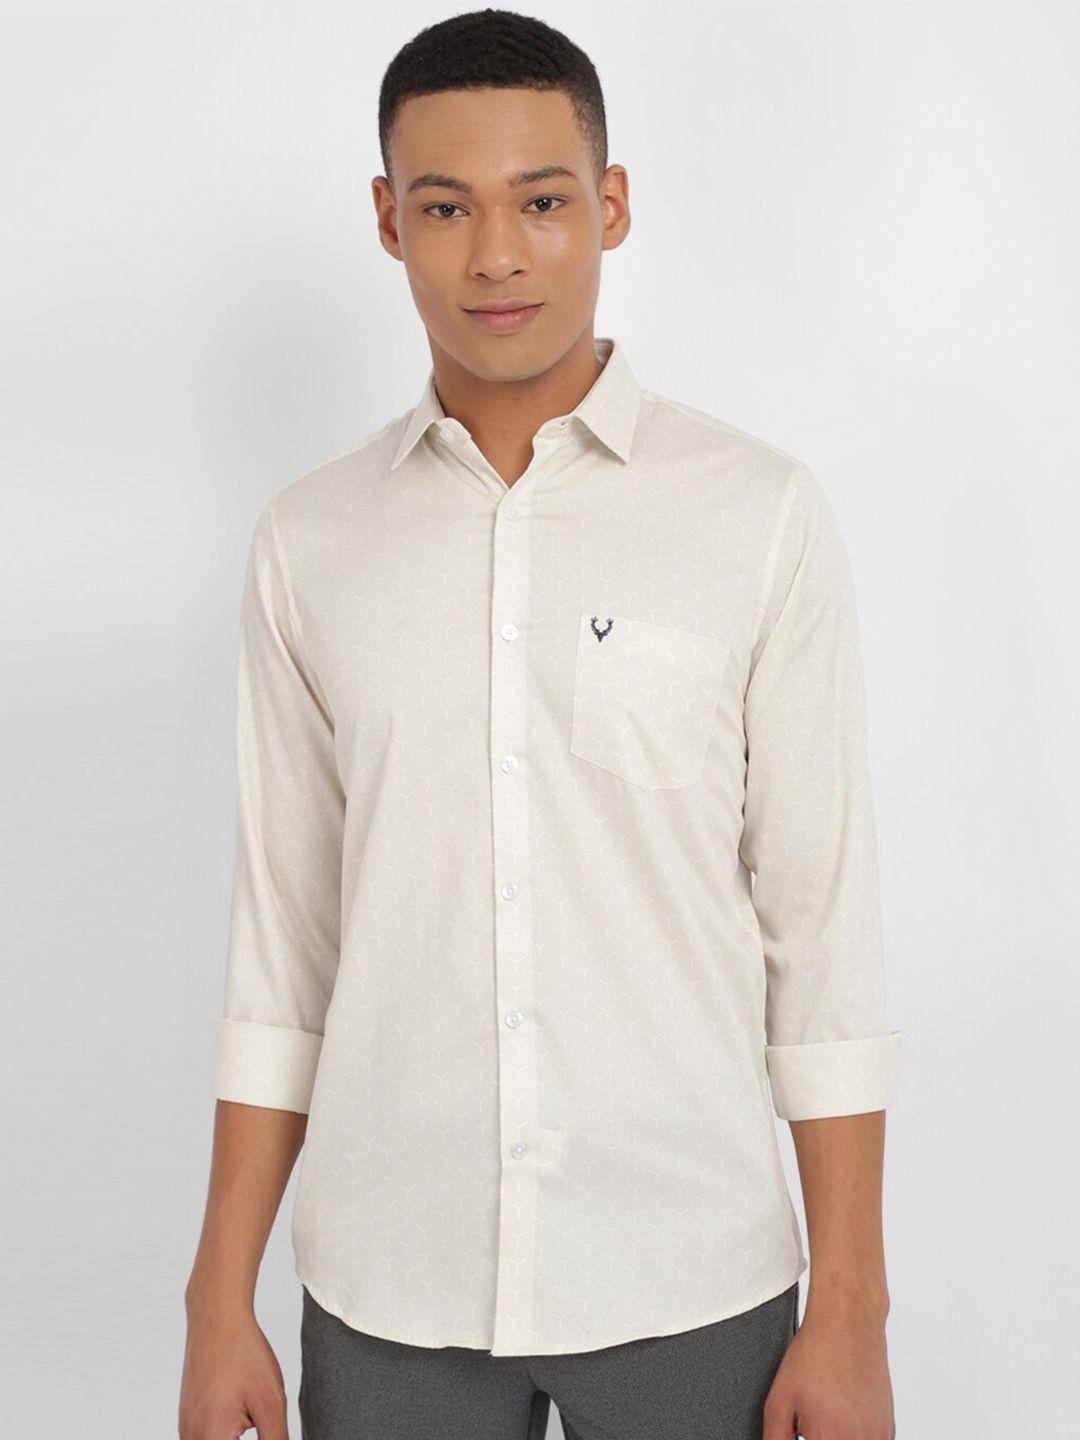 allen-solly-slim-fit-abstract-printed-pure-cotton-casual-shirt